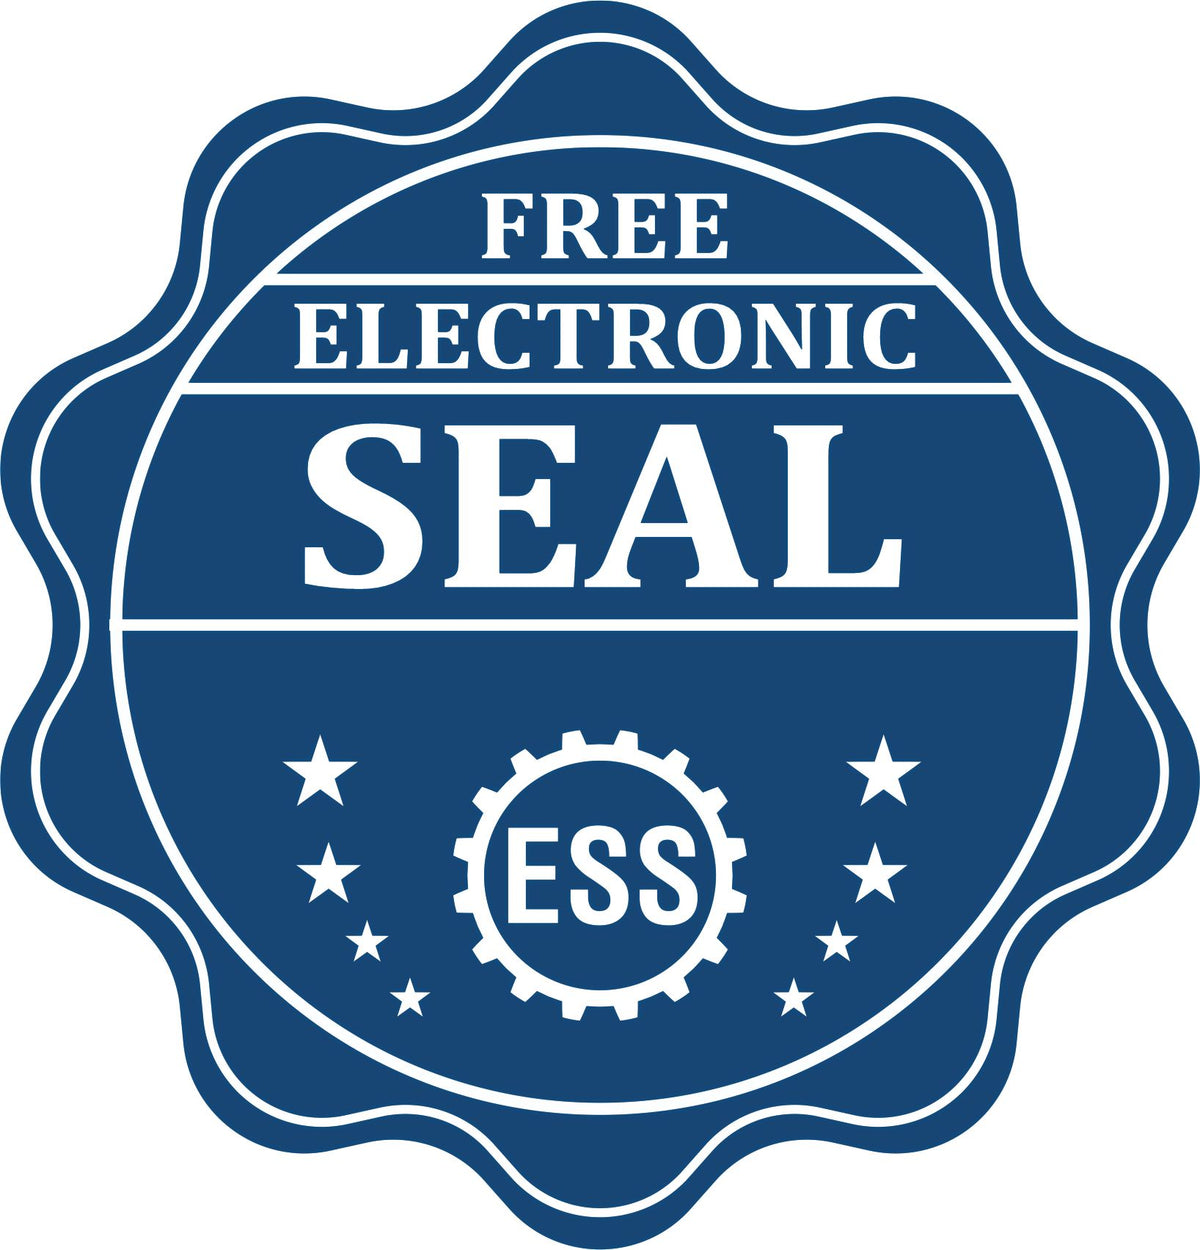 A badge showing a free electronic seal for the Long Reach Georgia PE Seal with stars and the ESS gear on the emblem.